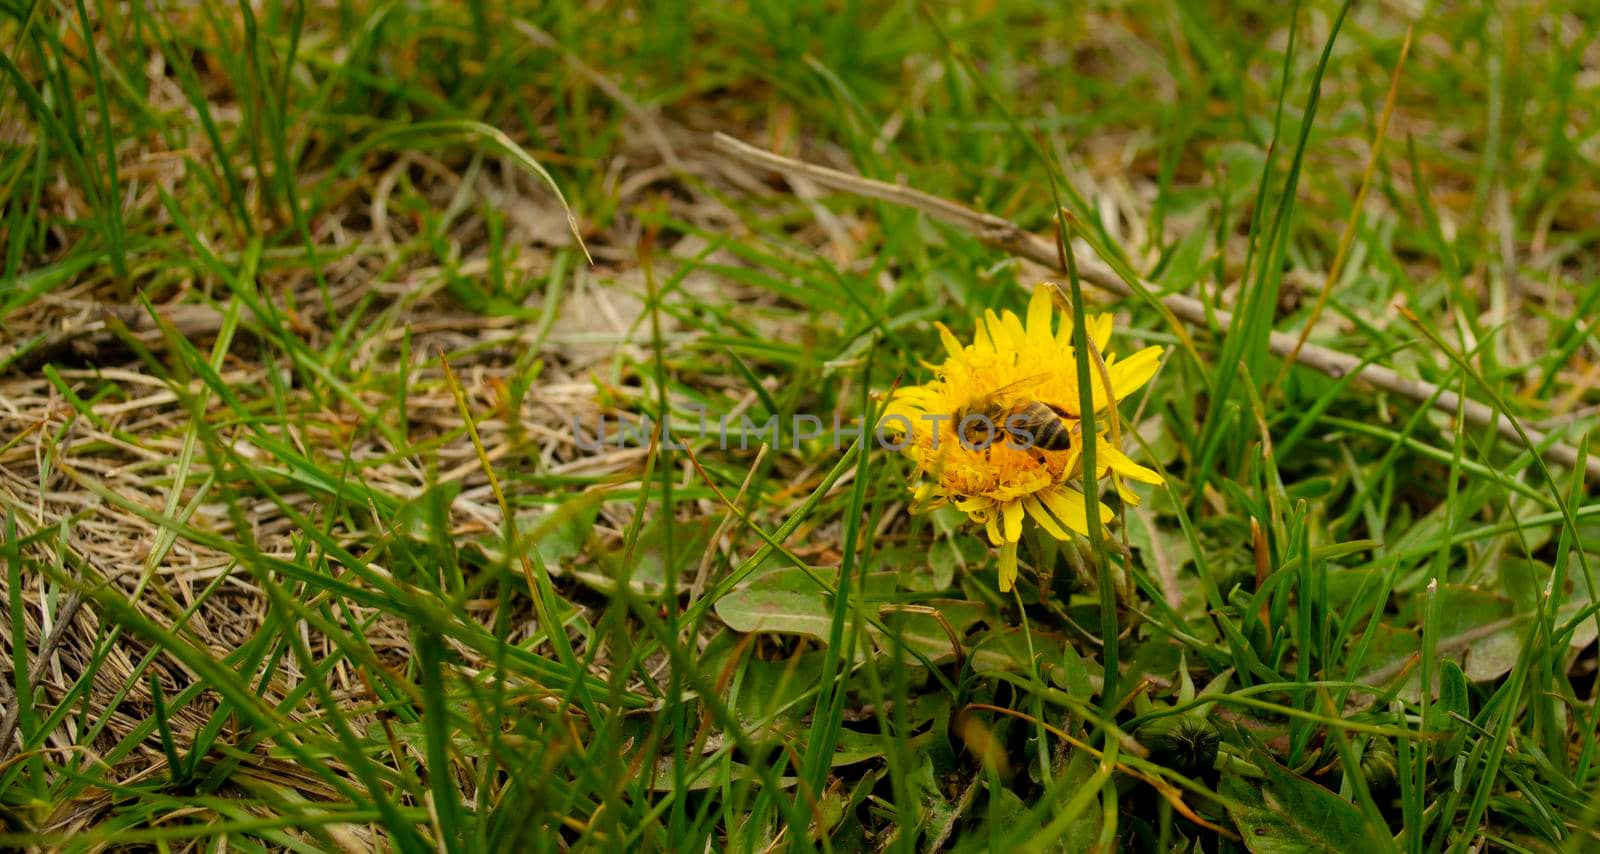 A honey bee pollinates a yellow dandelion flower in a spring meadow. Seasonal natural scene. Free space for text by mtx